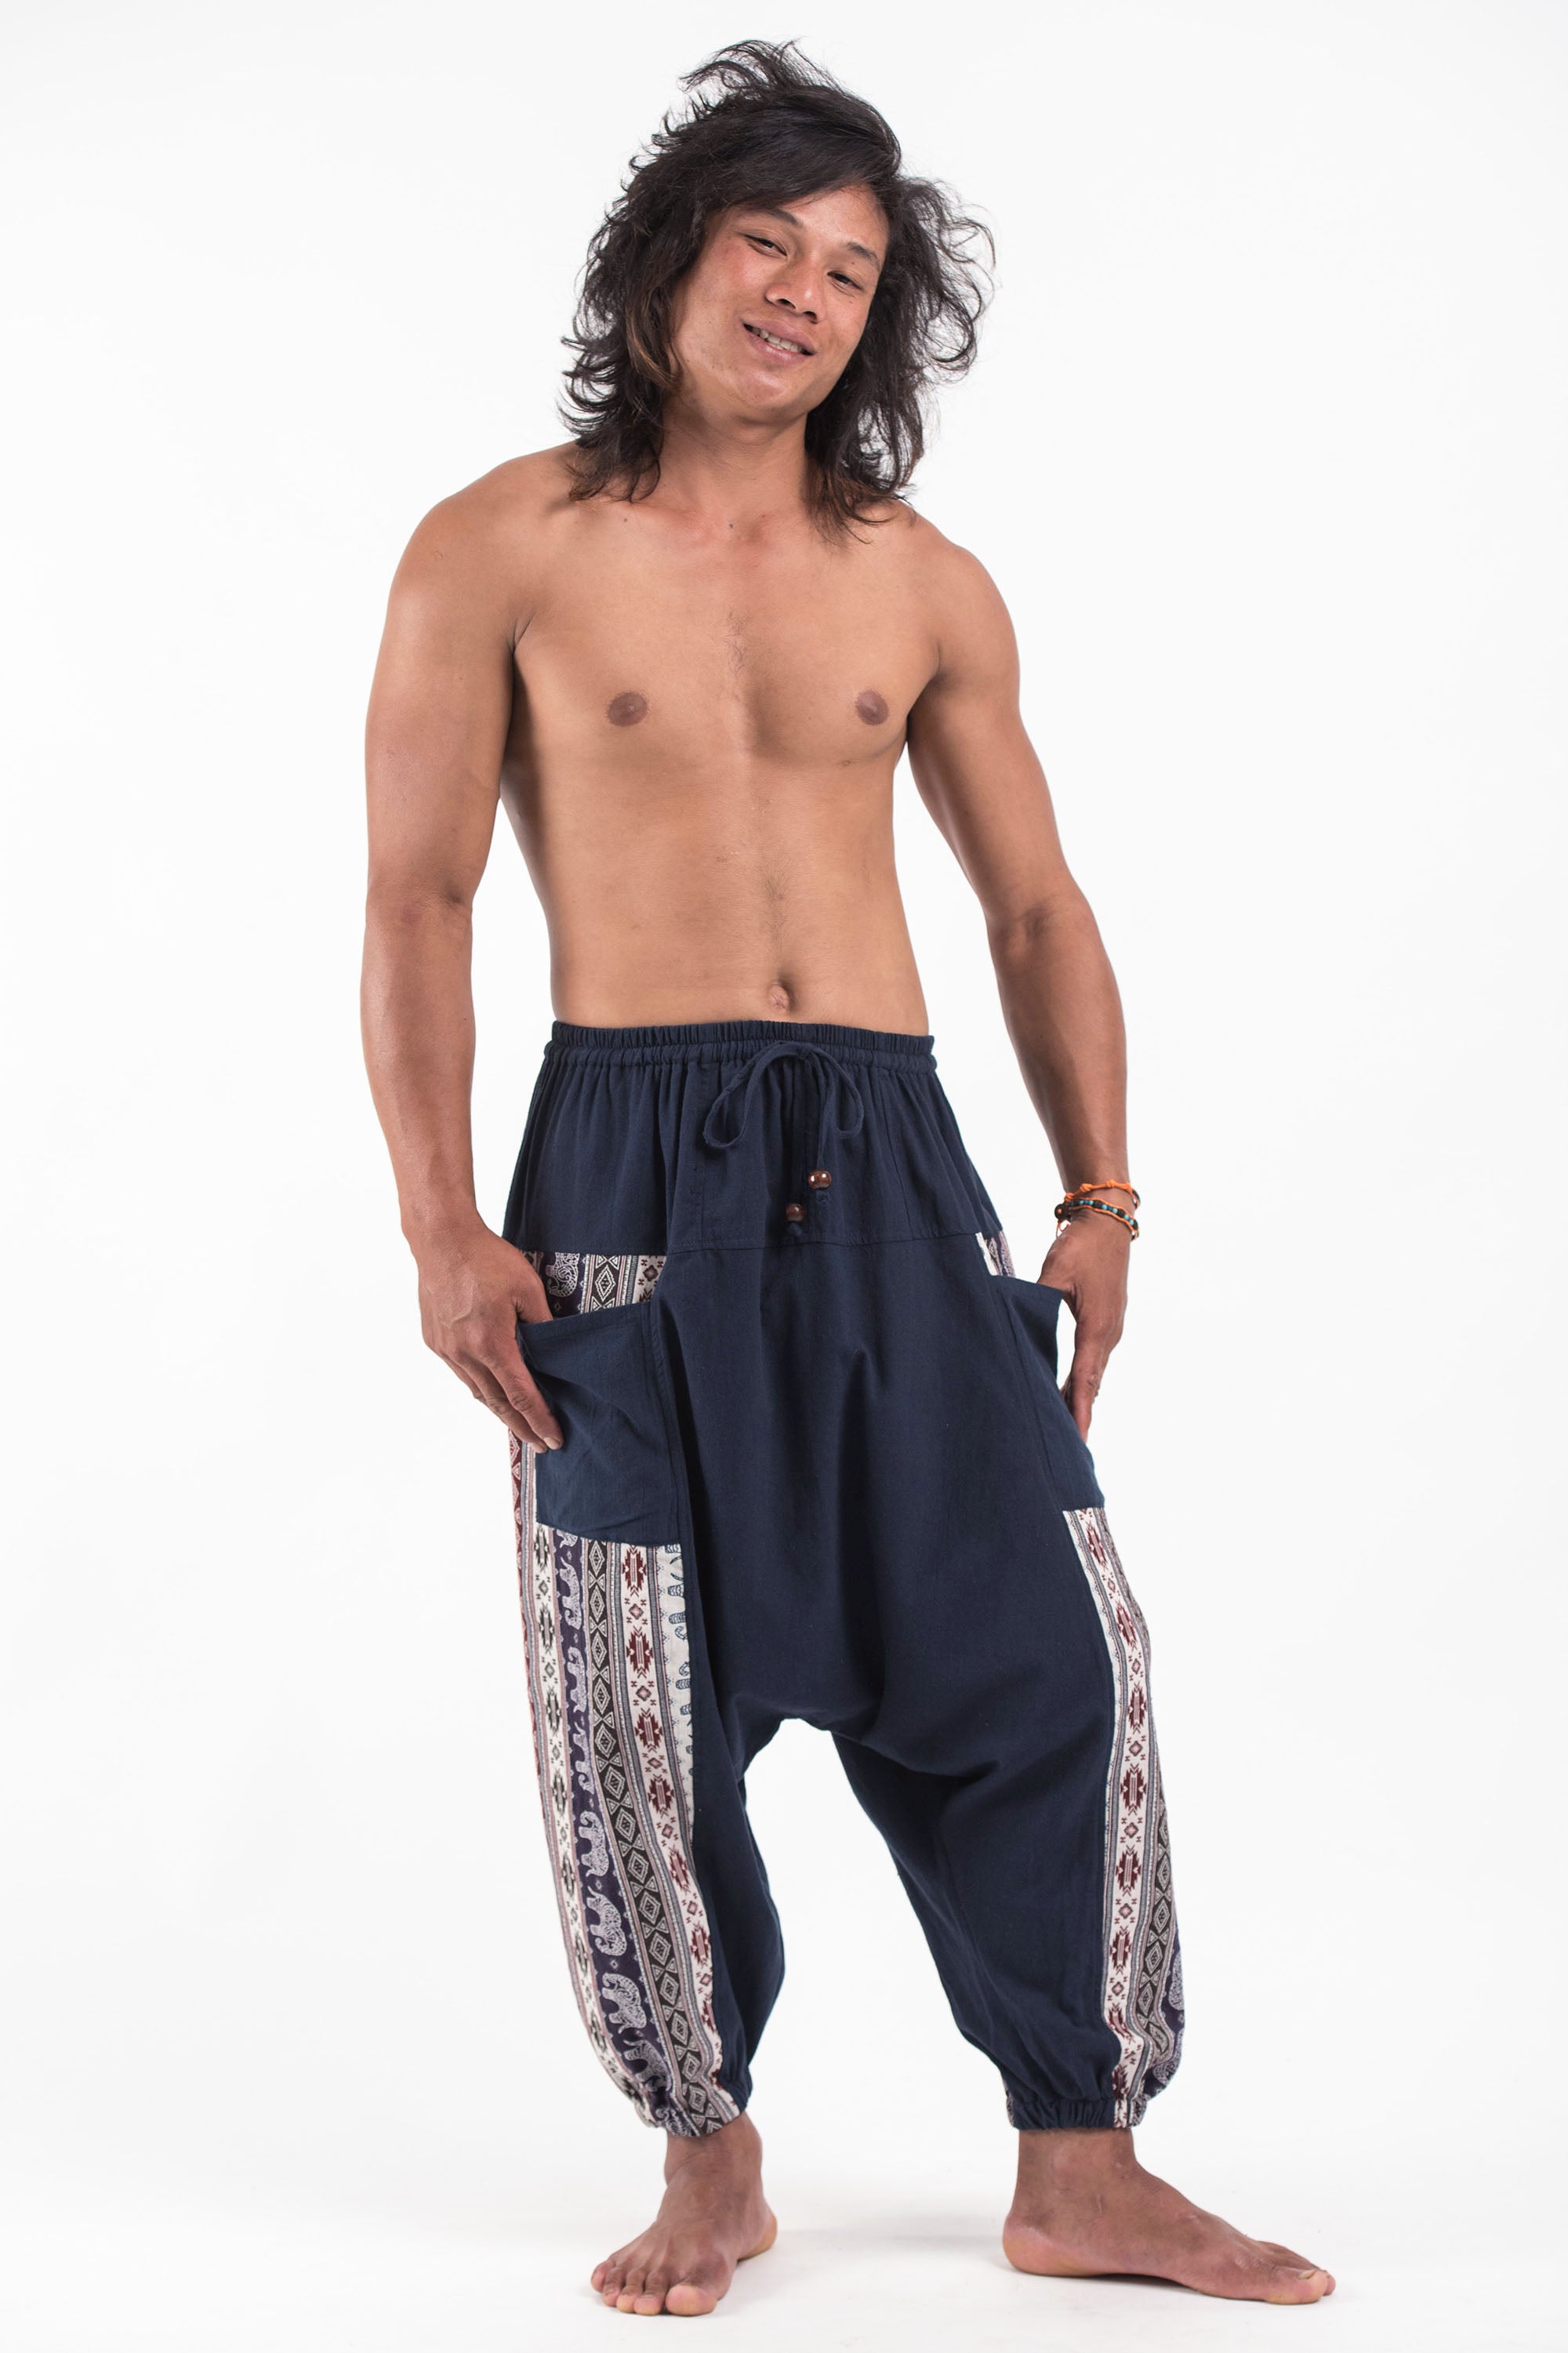 Buy Whitewhale Men's Loose Fit Harem Pants (WHITEWHALE-HAREM-INDIA-29_Black_Free  Size) at Amazon.in